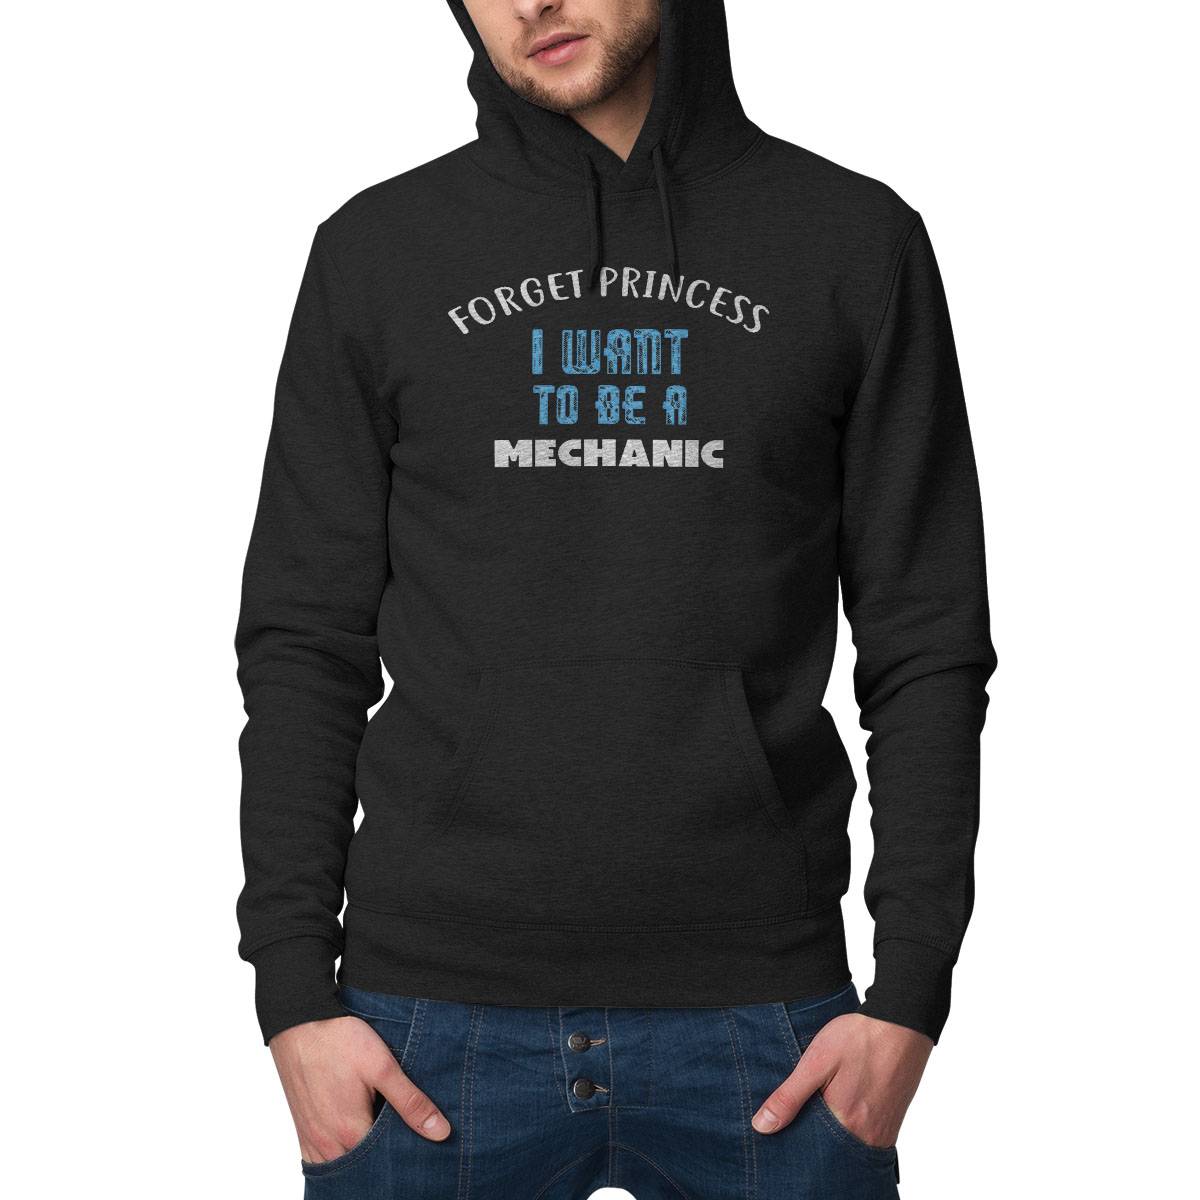 Forget Princess I Want To Be A Mechanic T-Shirt